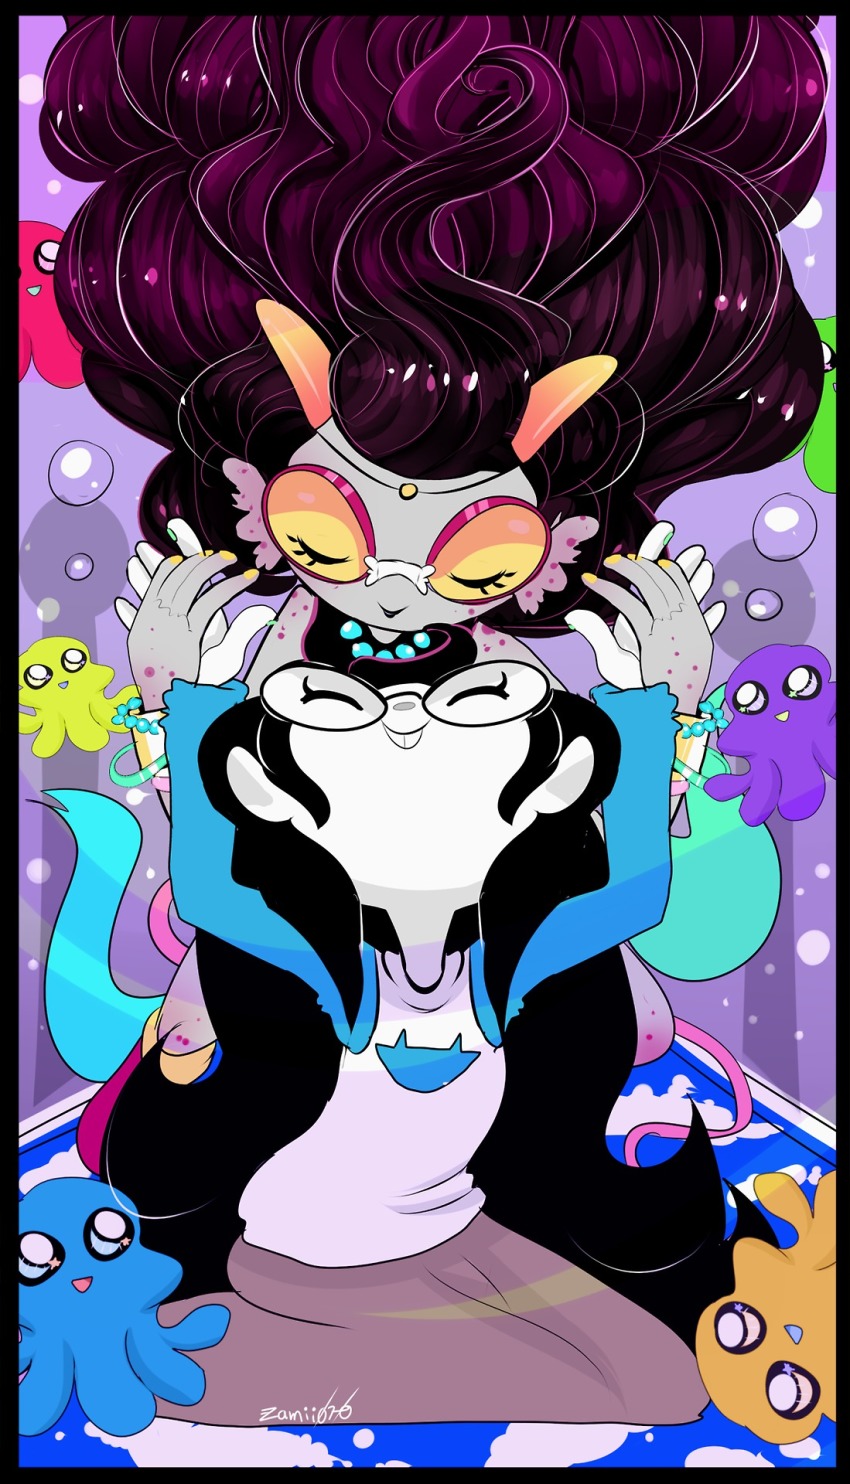 deleted_source feferi_peixes horrorcuties jade_harley moved_source shipping squiddles zamii070